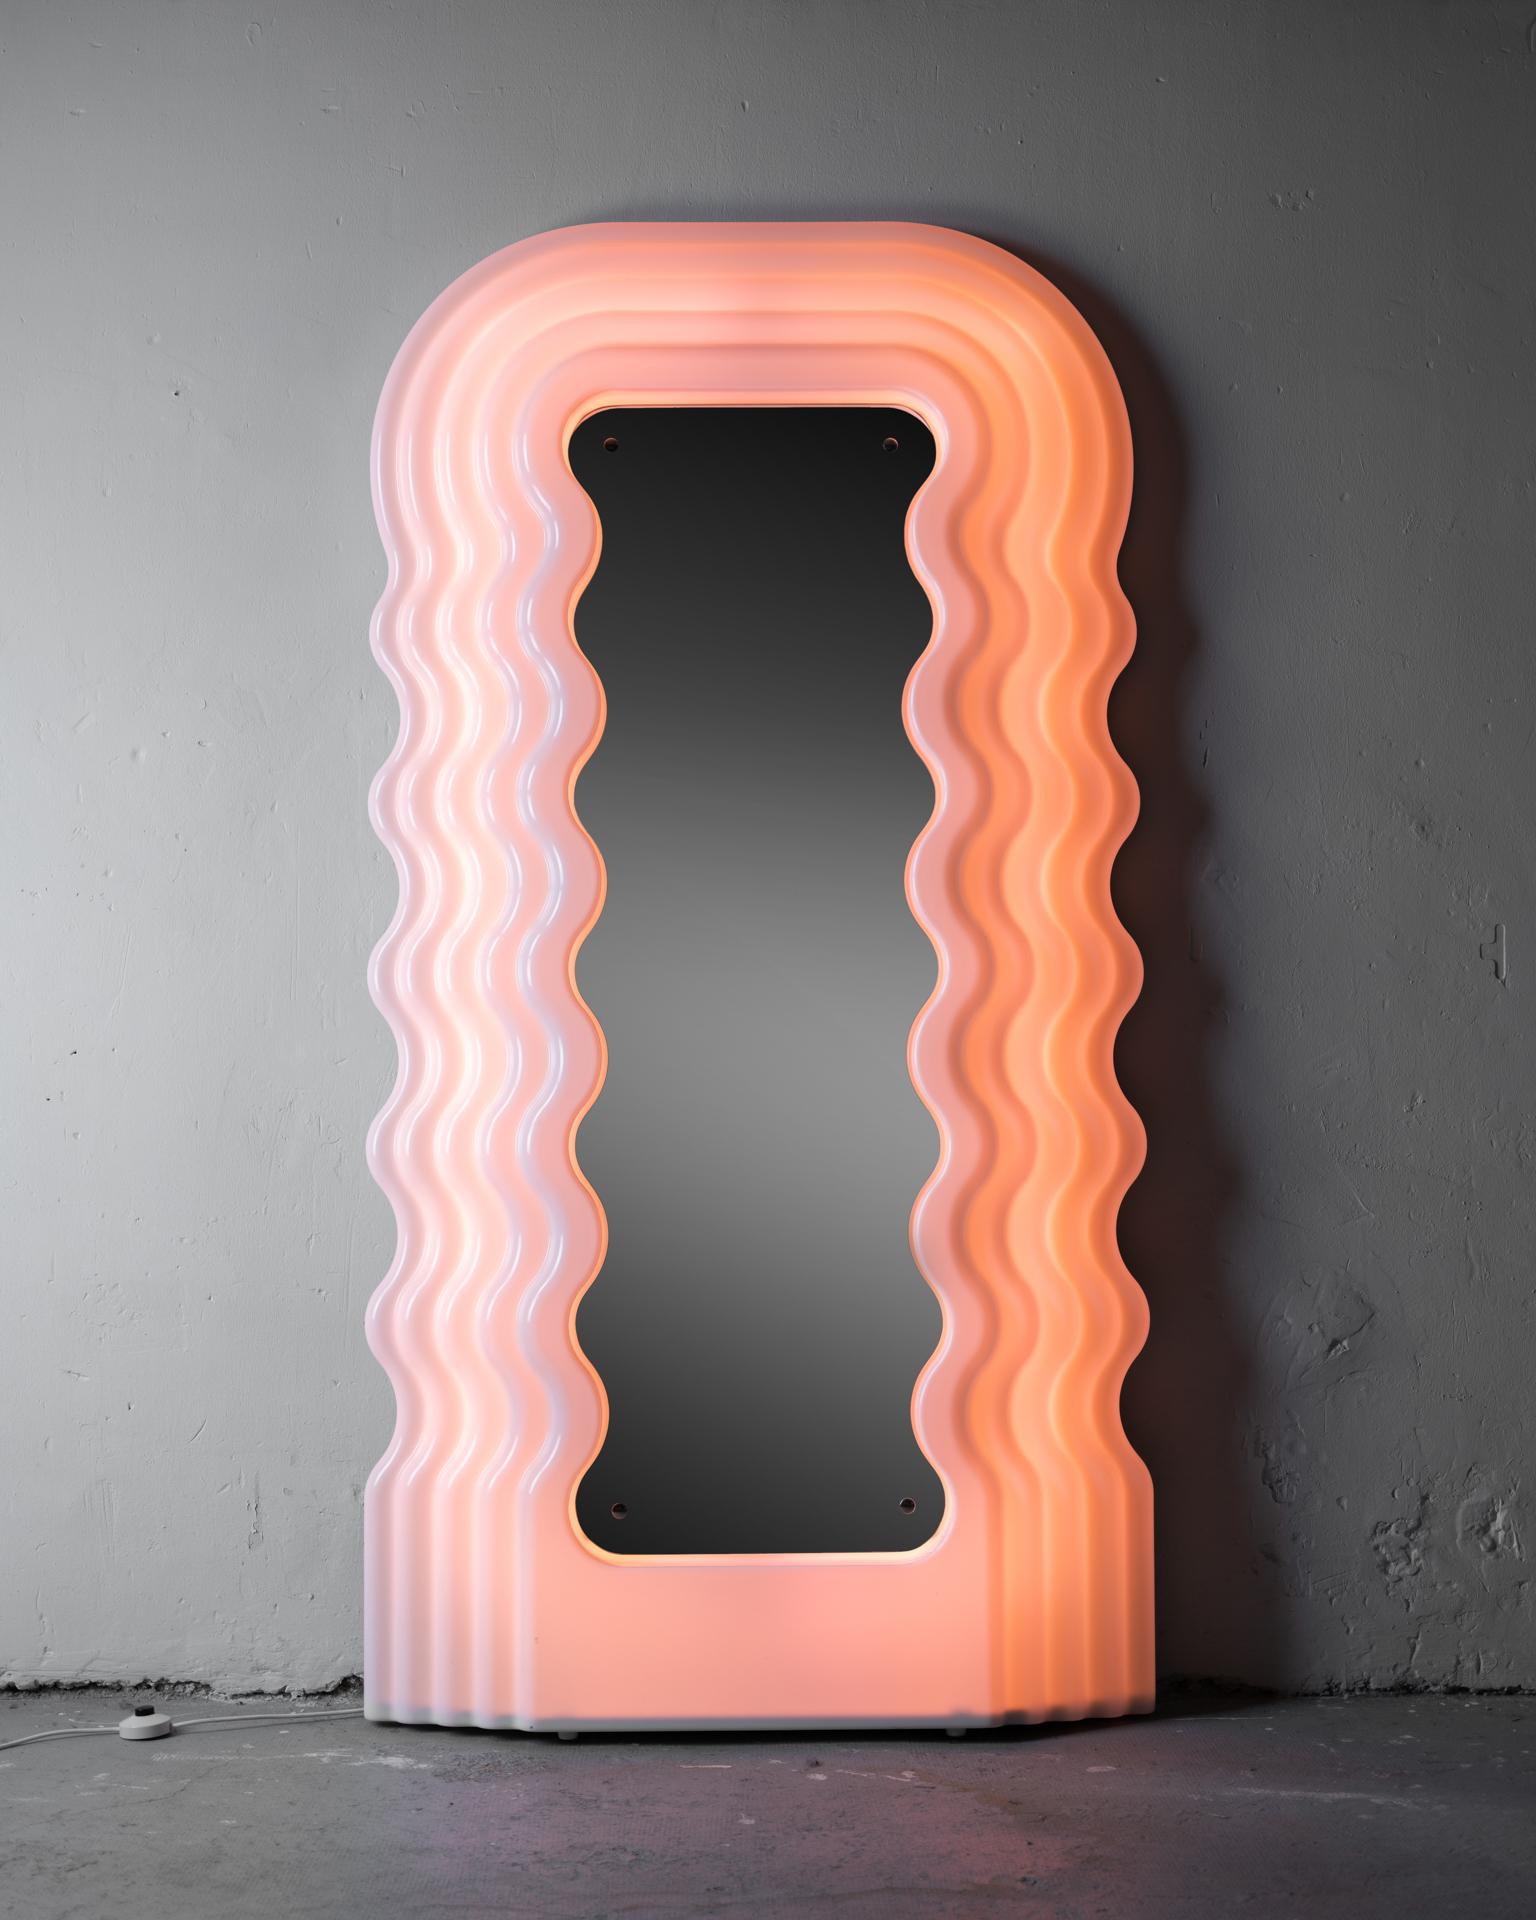 Designed in 1970 for Poltronova, the Ultrafragola is a Large illuminated mirror made of an acrylic profile resembling long wavy hair and backlit with a neon light system. The mirror was launched in the 70’s and was an absolute chocker, so much that